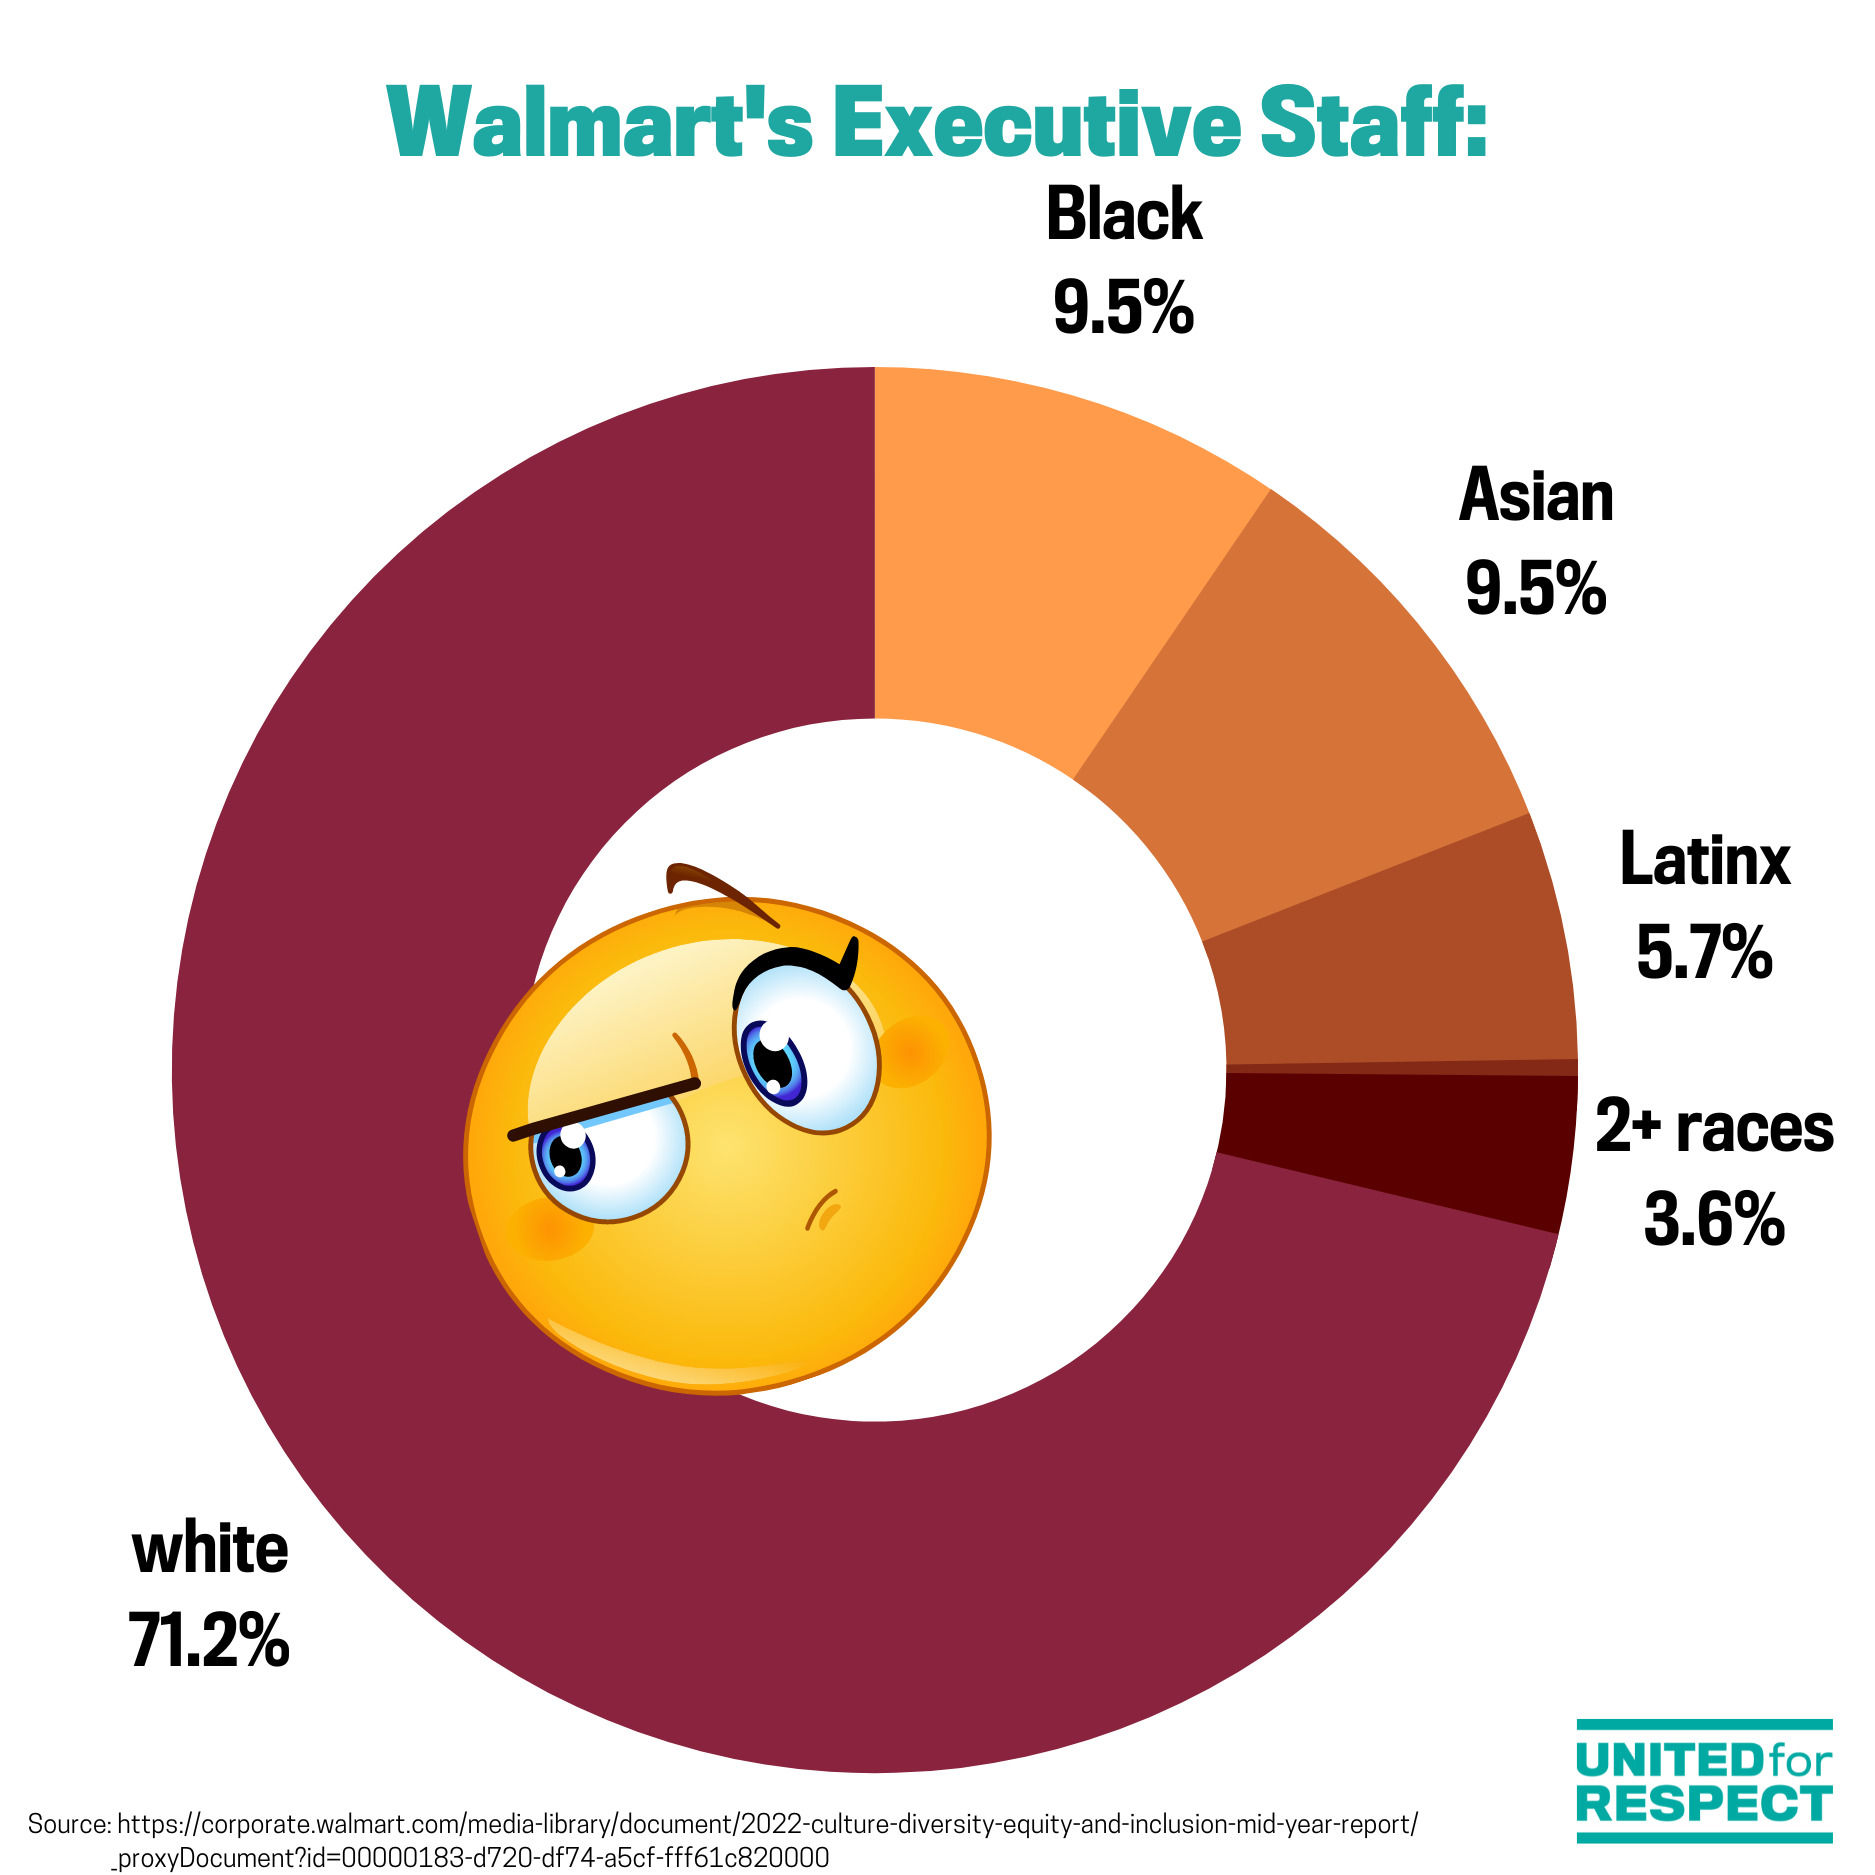 A pie chart visualizes the racial breakdown of Walmart's executive staff (which is 71.2% white).